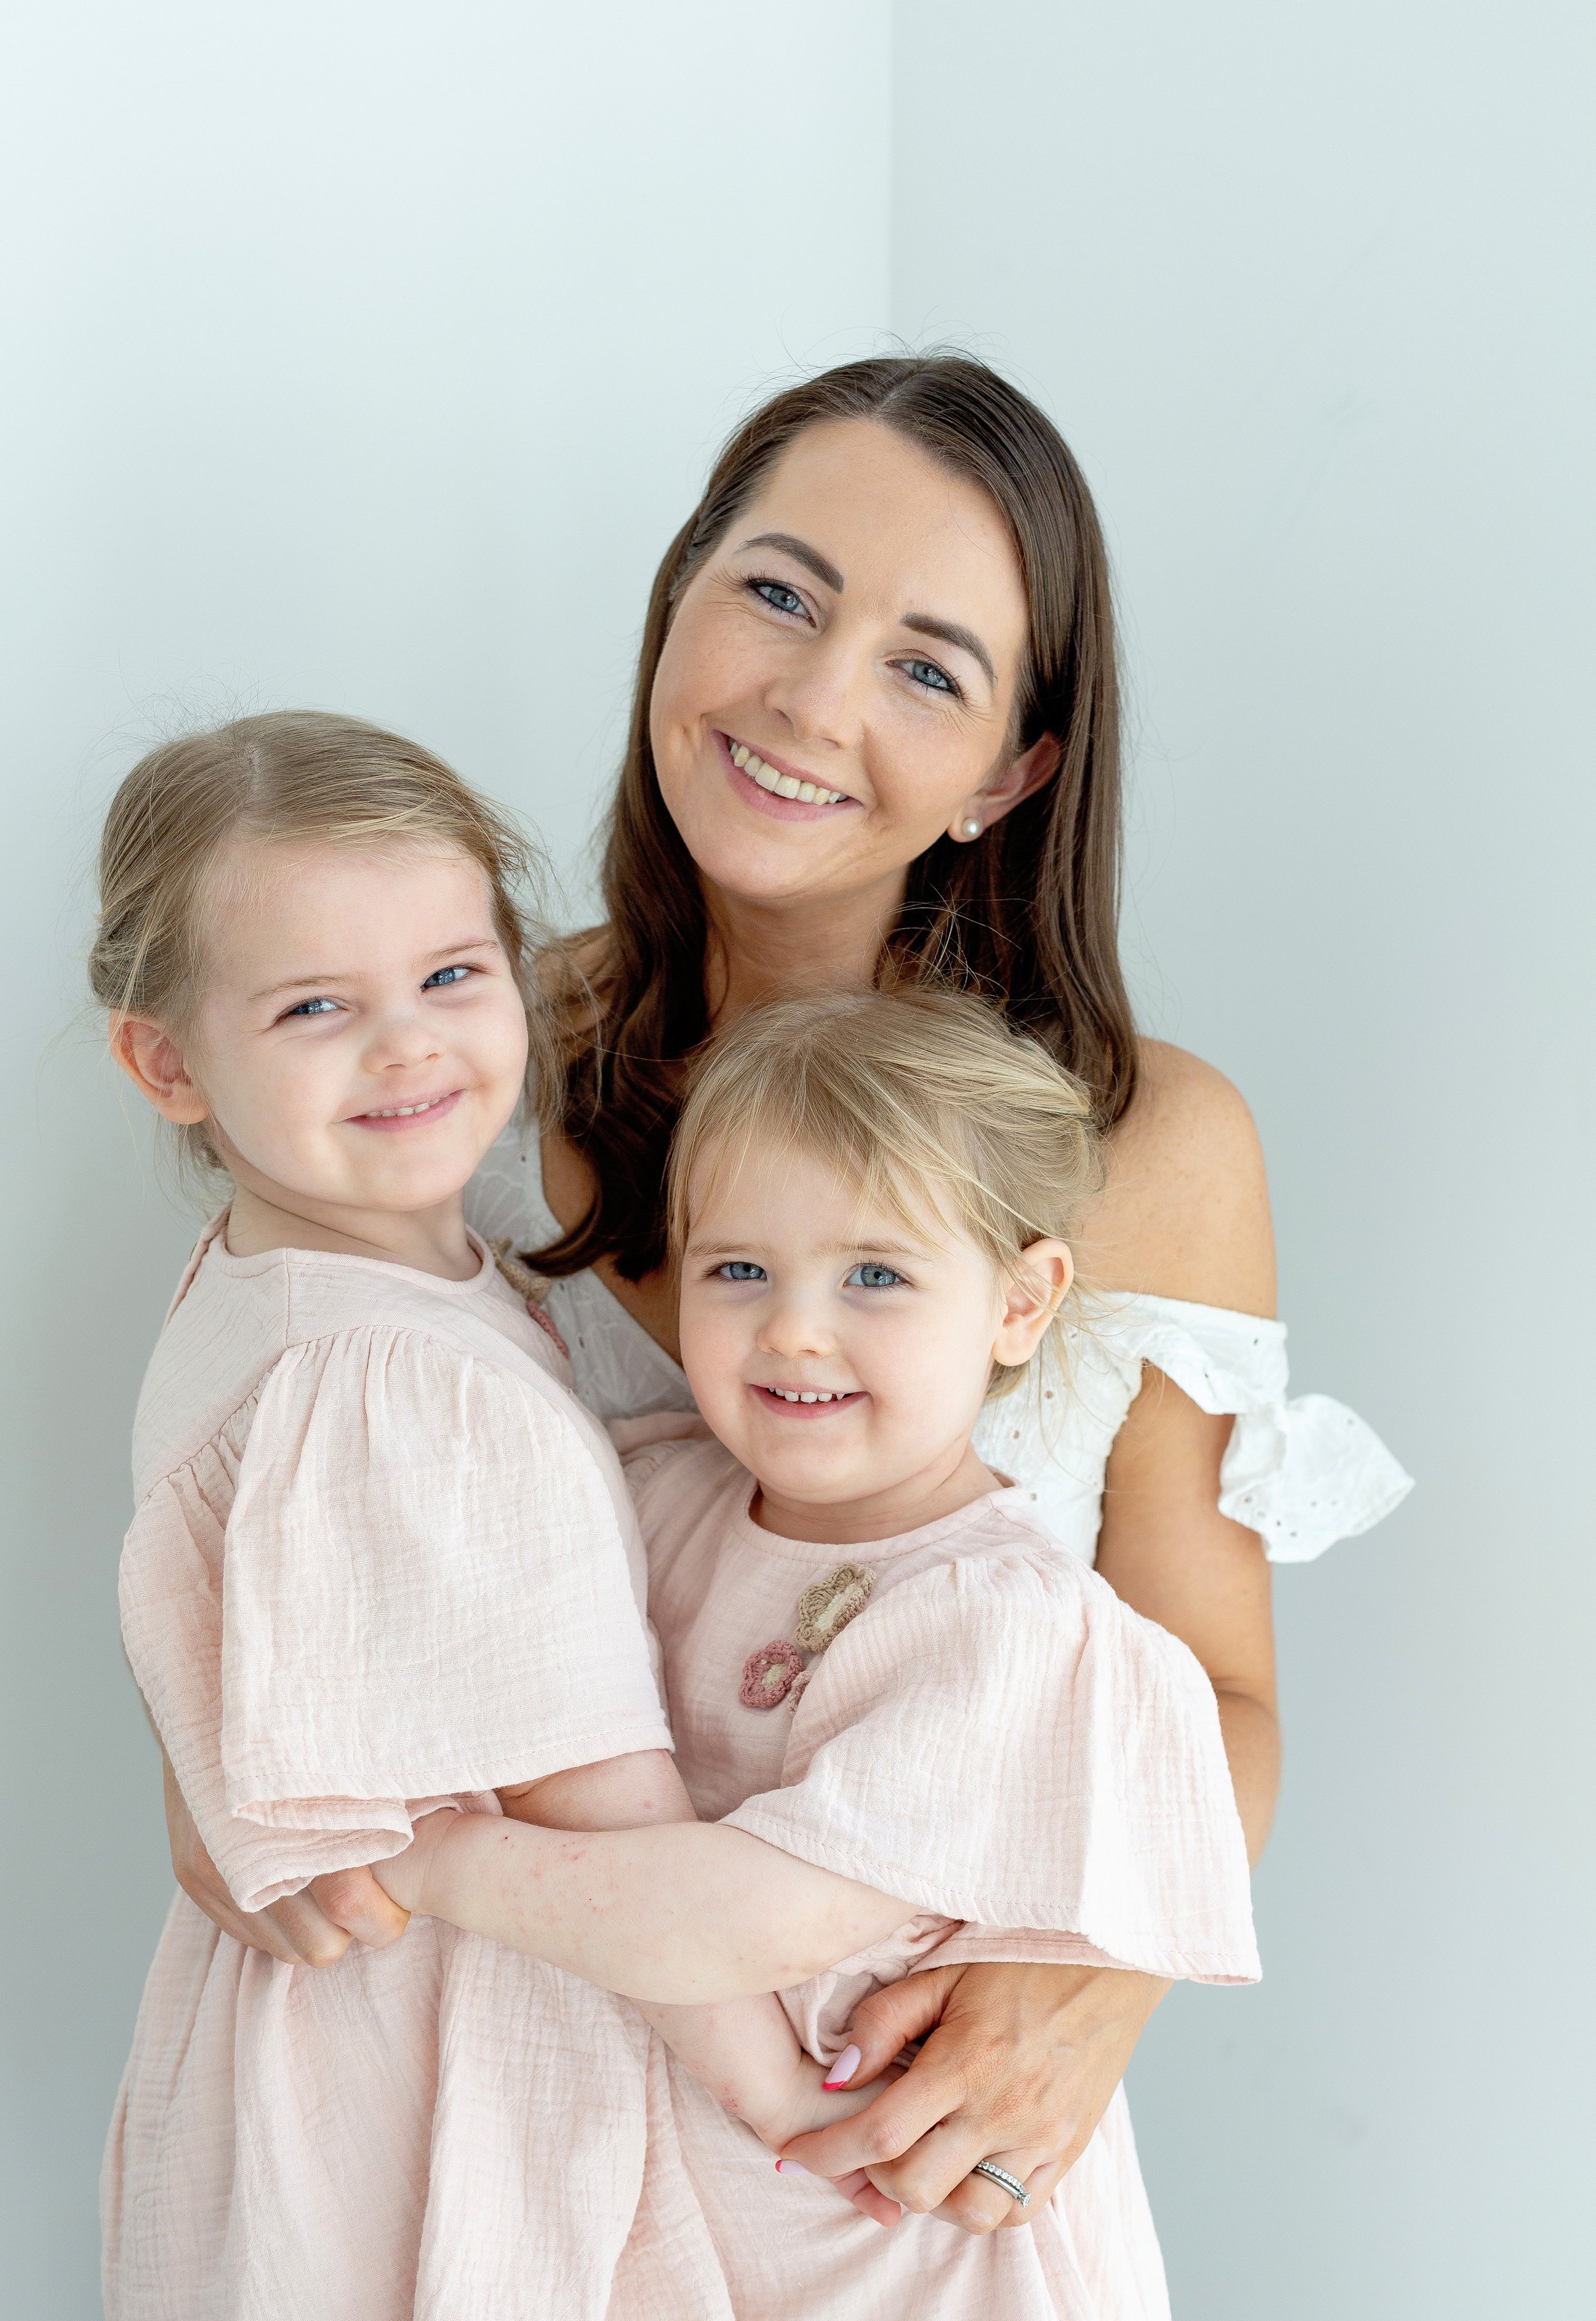 Mothers-Day-photography-session-hertfordshireEvie-Grace-PhotographyEvie-Grace-PhotographyIMG_0811.jpg